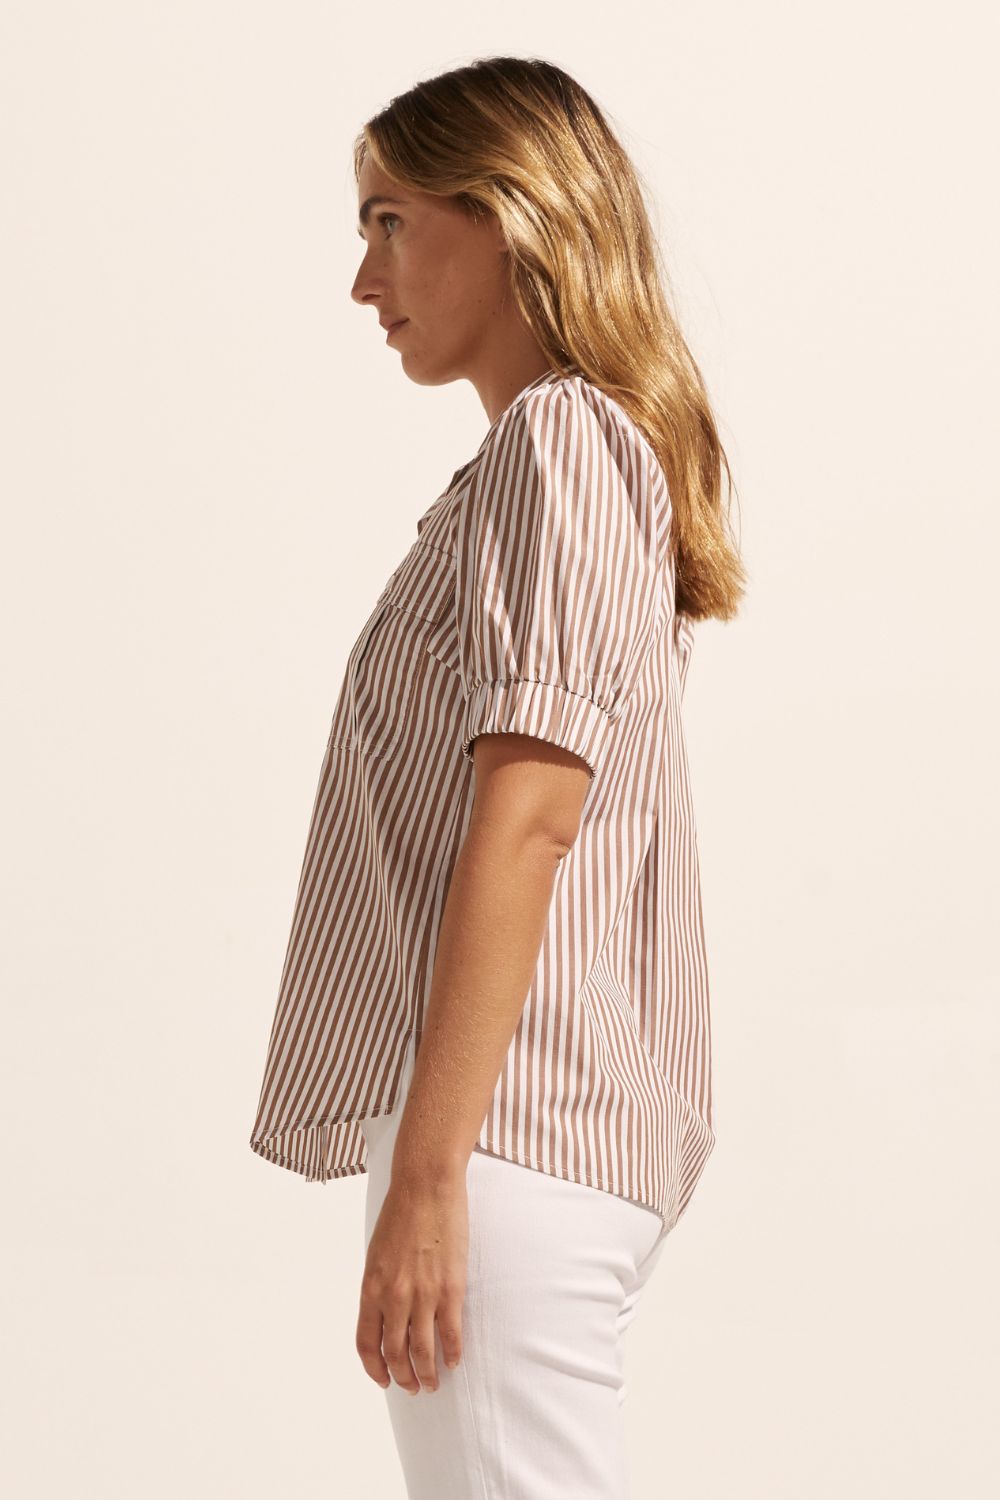 brown stripe, high neck, button up shirt, top, side view